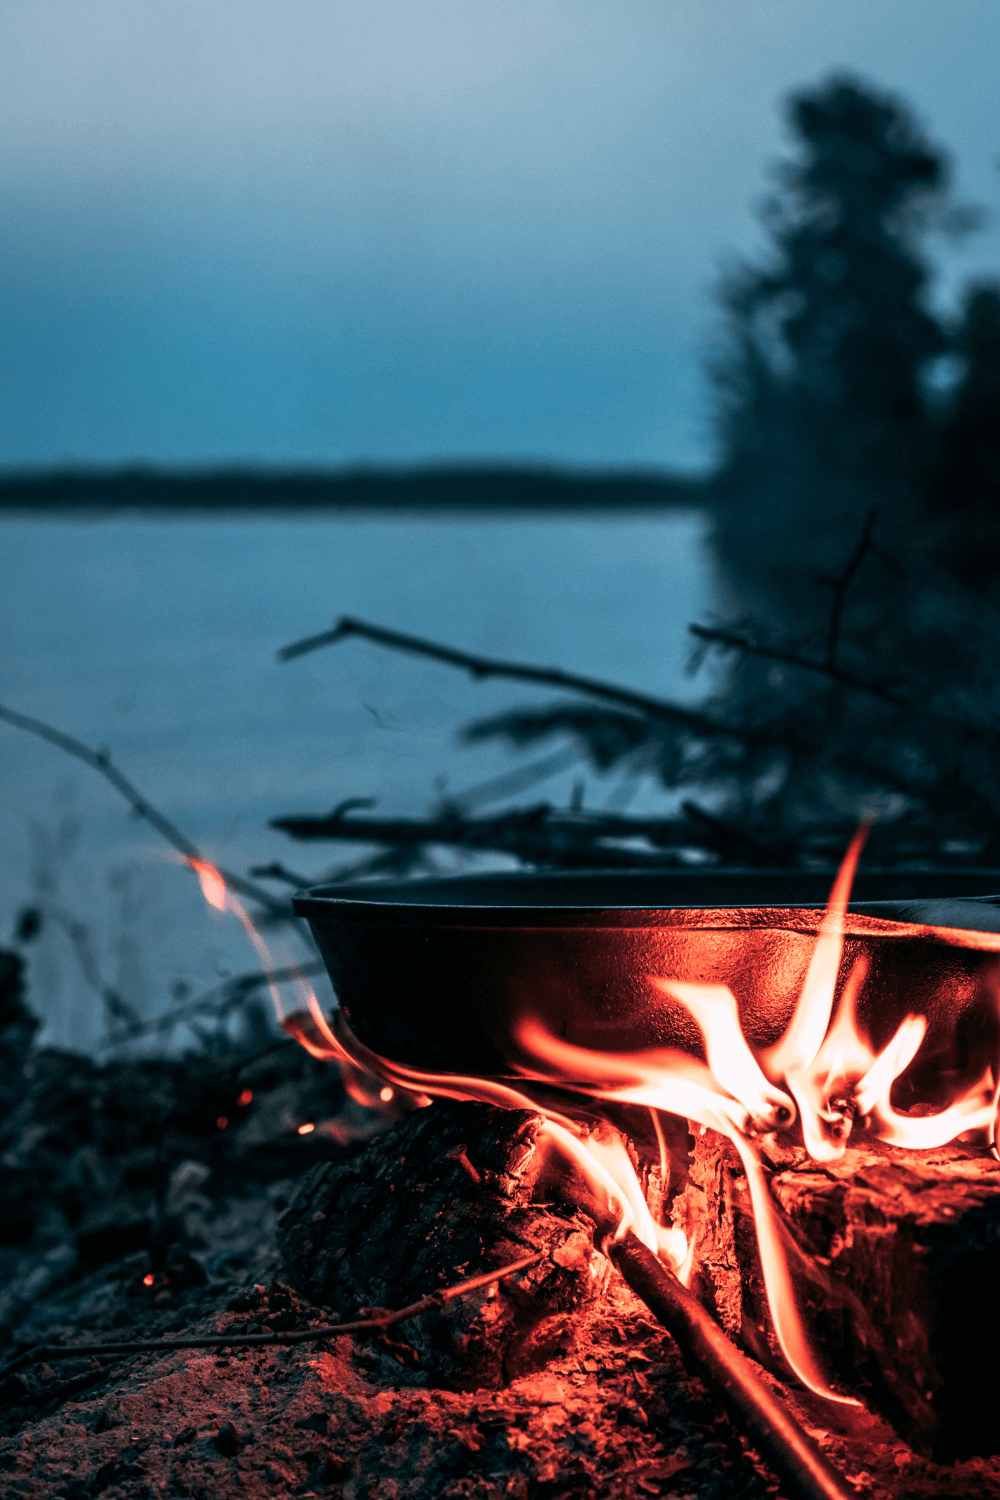 Delicious camping meal cooked over an open fire at sunset, showcasing the joys of outdoor cooking and nature appreciation.